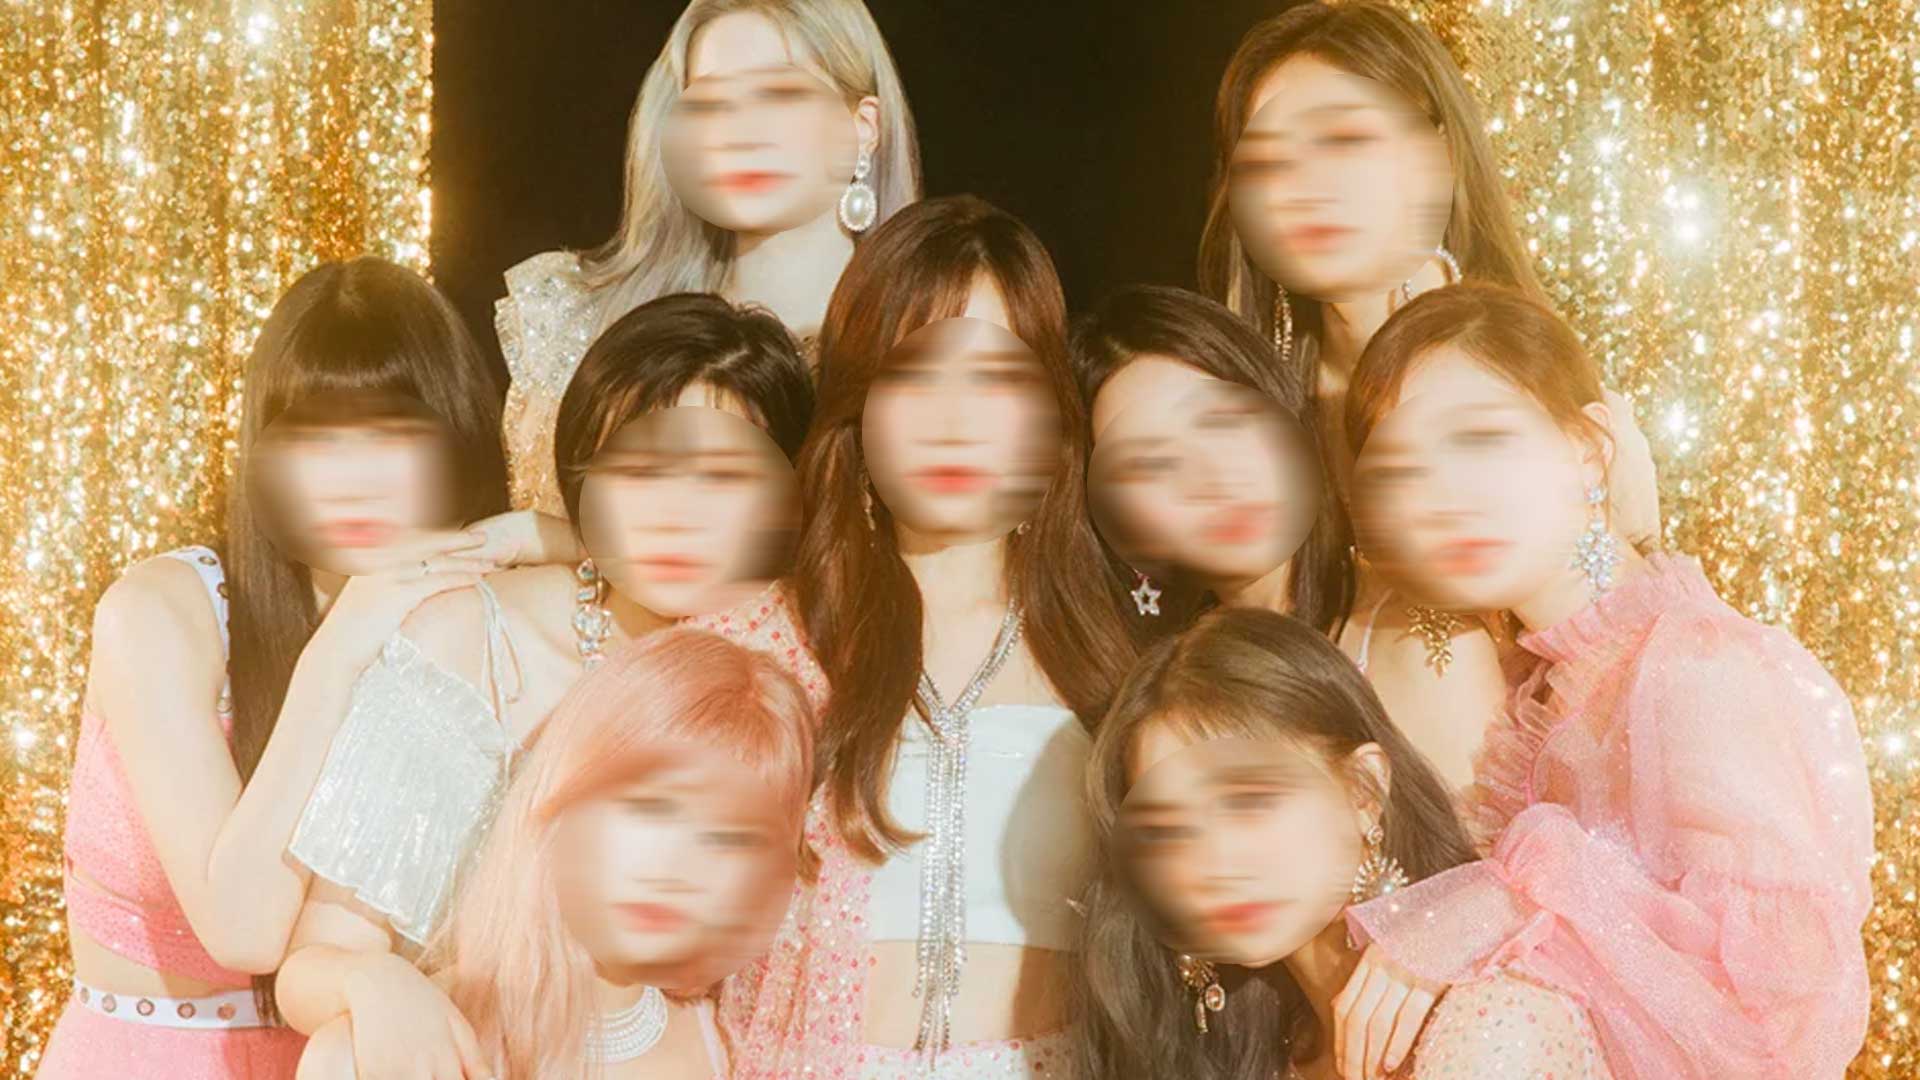 A blurred image of a K-Pop group